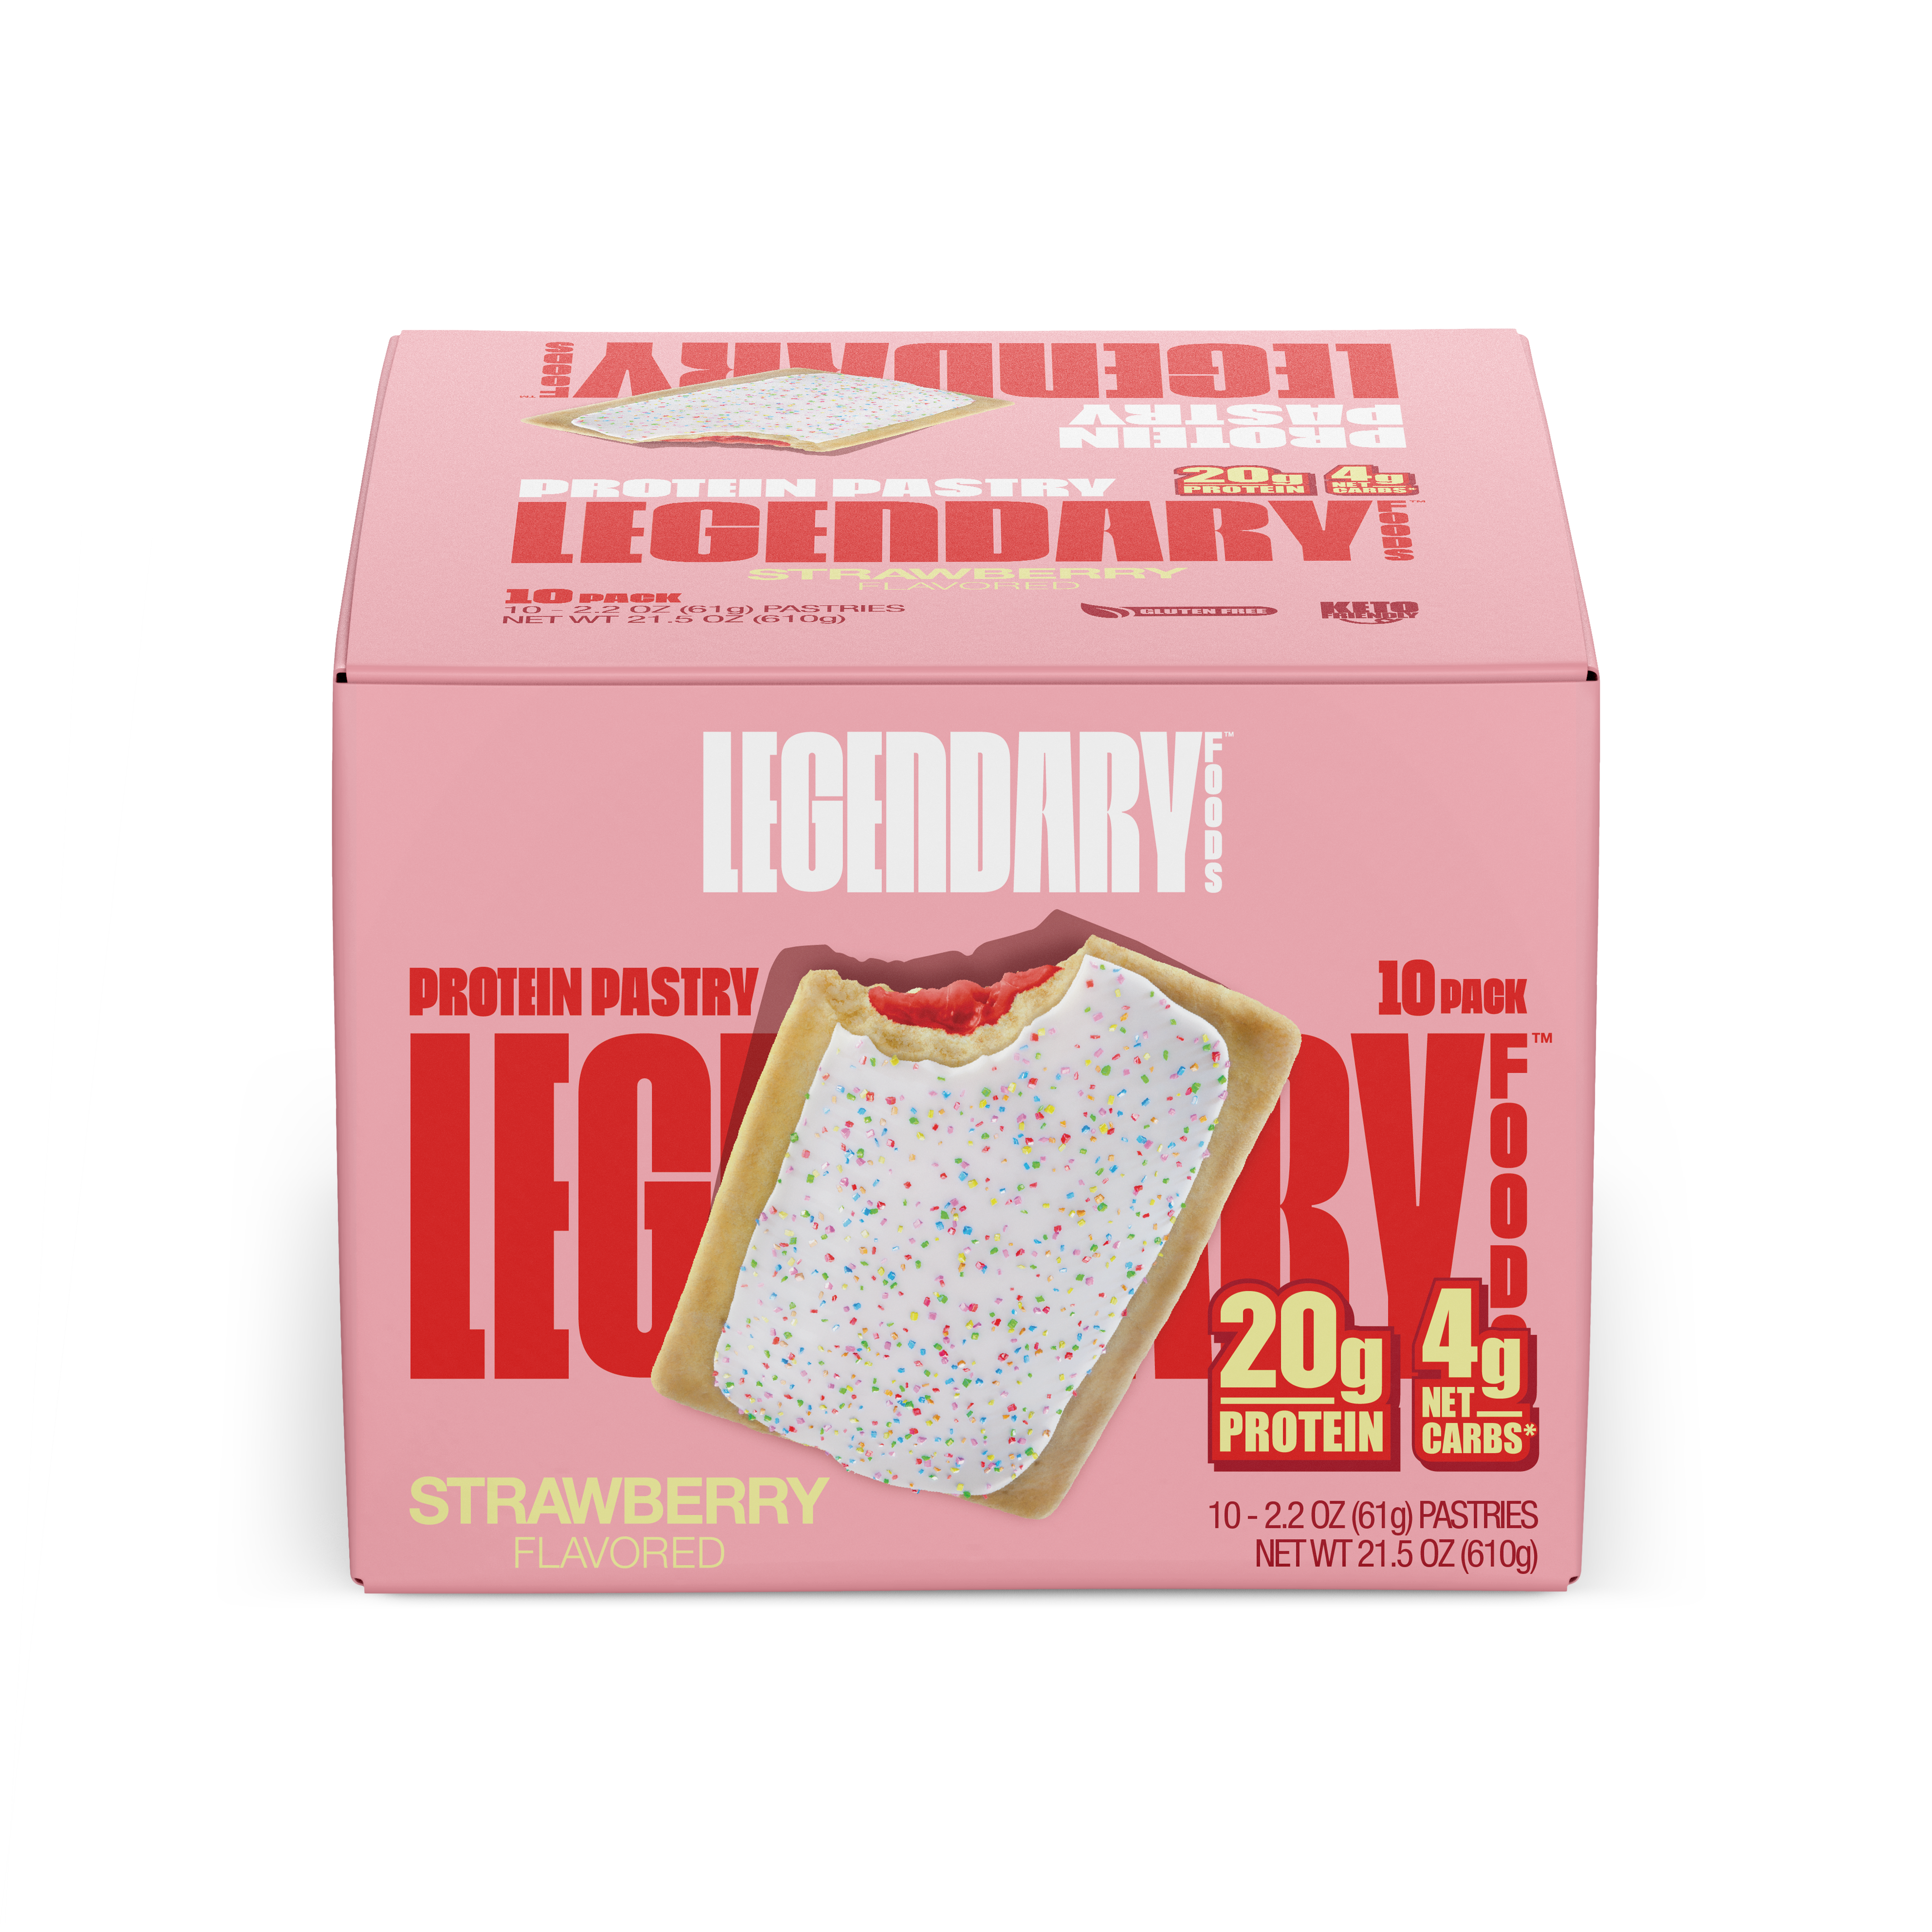 "Cake Style" Low-Carb Protein Pastry by Legendary Foods - Strawberry